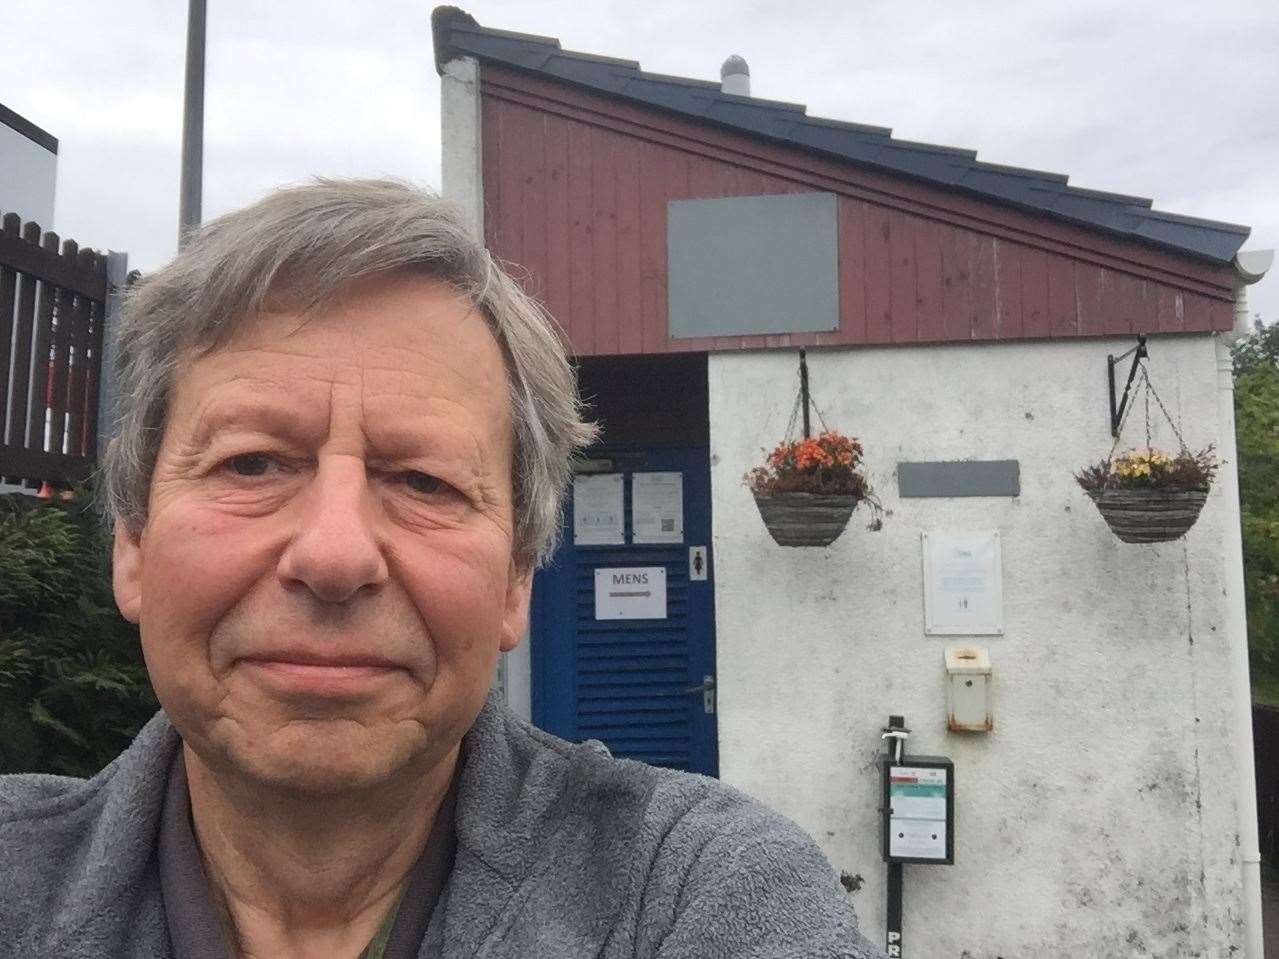 John Wood, campaigner for provision of public toilets in remoter areas, outside facilities at his home village of Poolewe